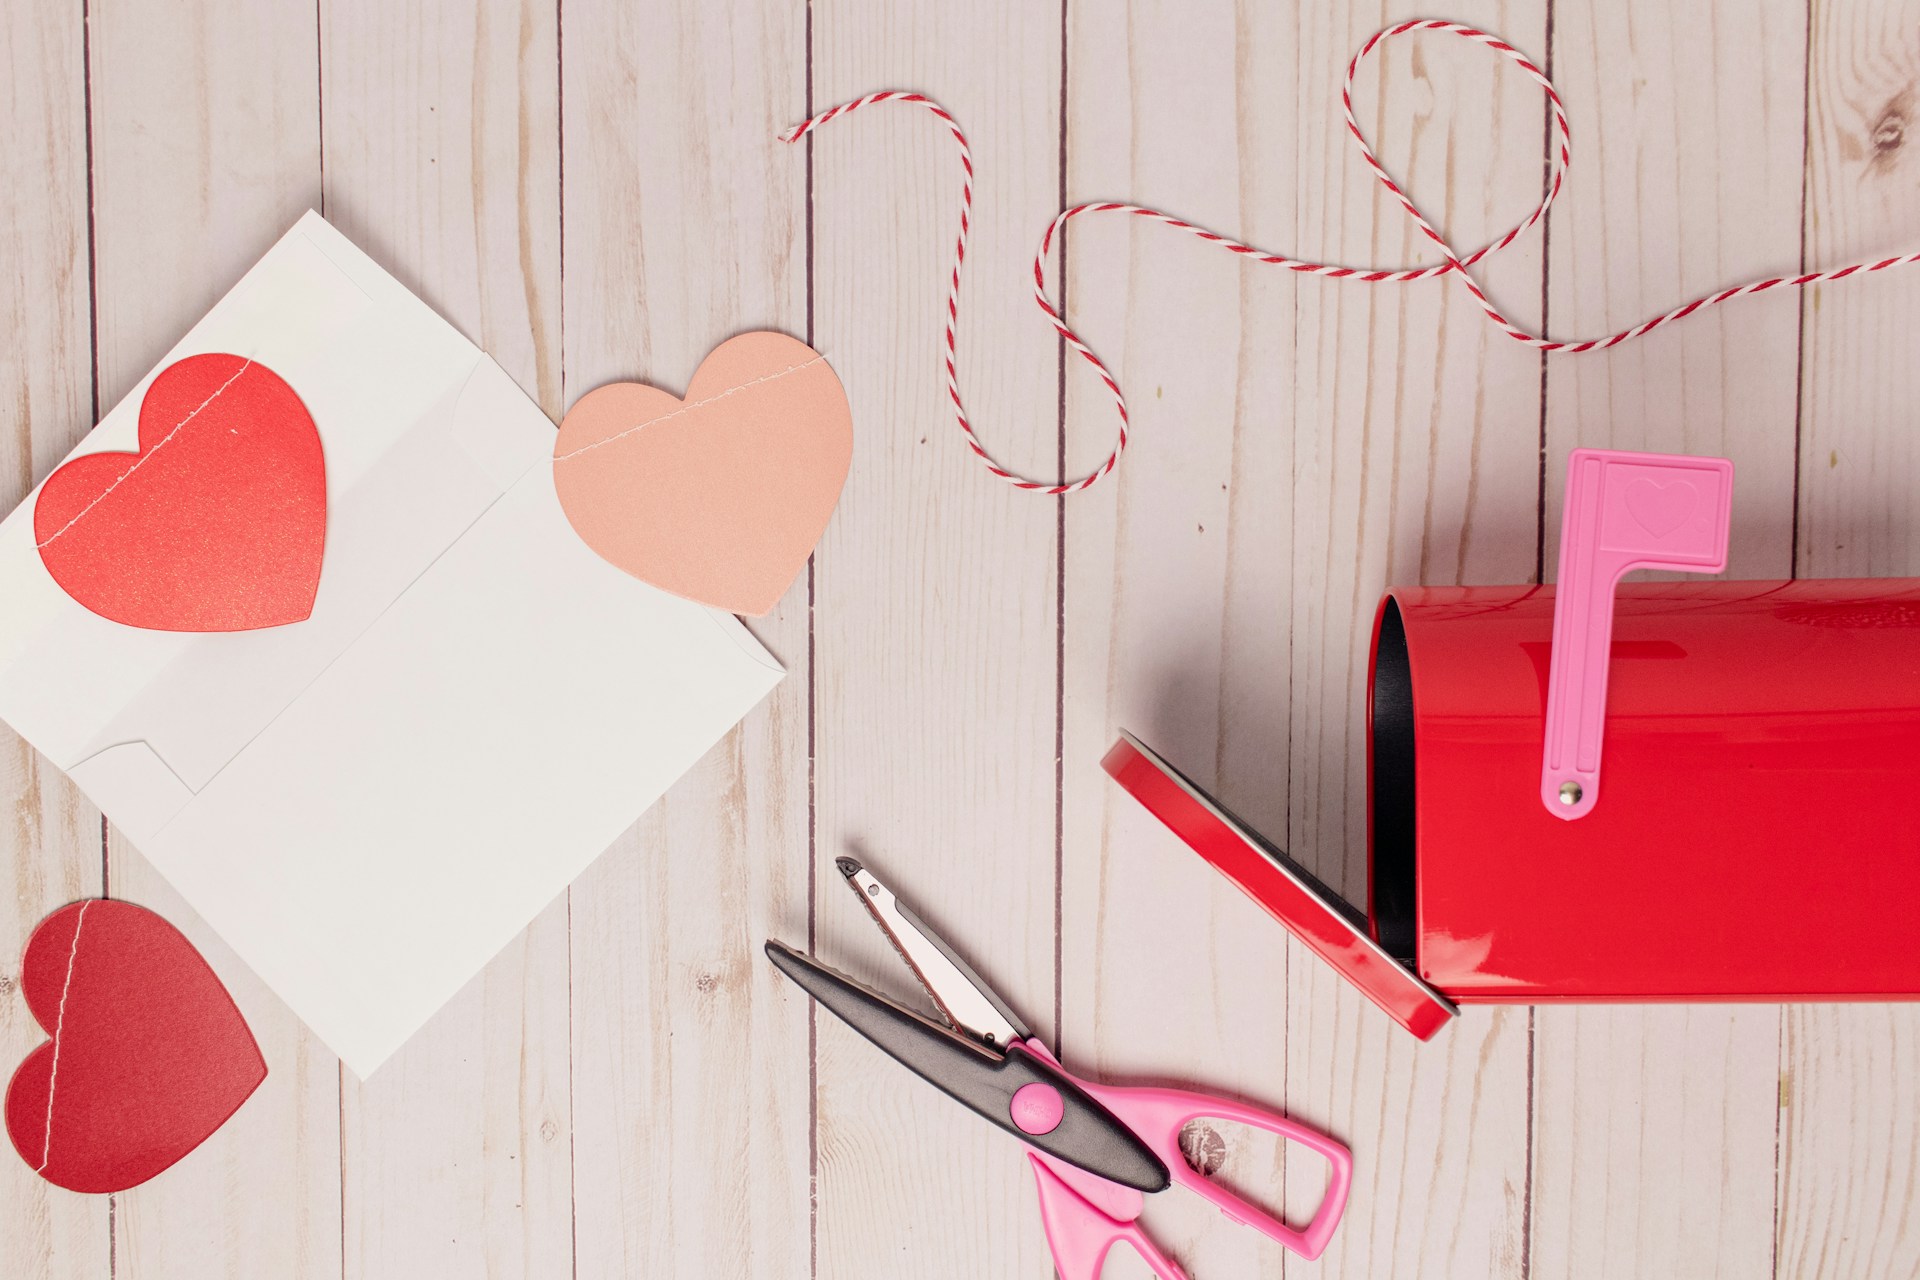 Valentine's Day craft of paper hearts, scissors, string, and a mailbox.